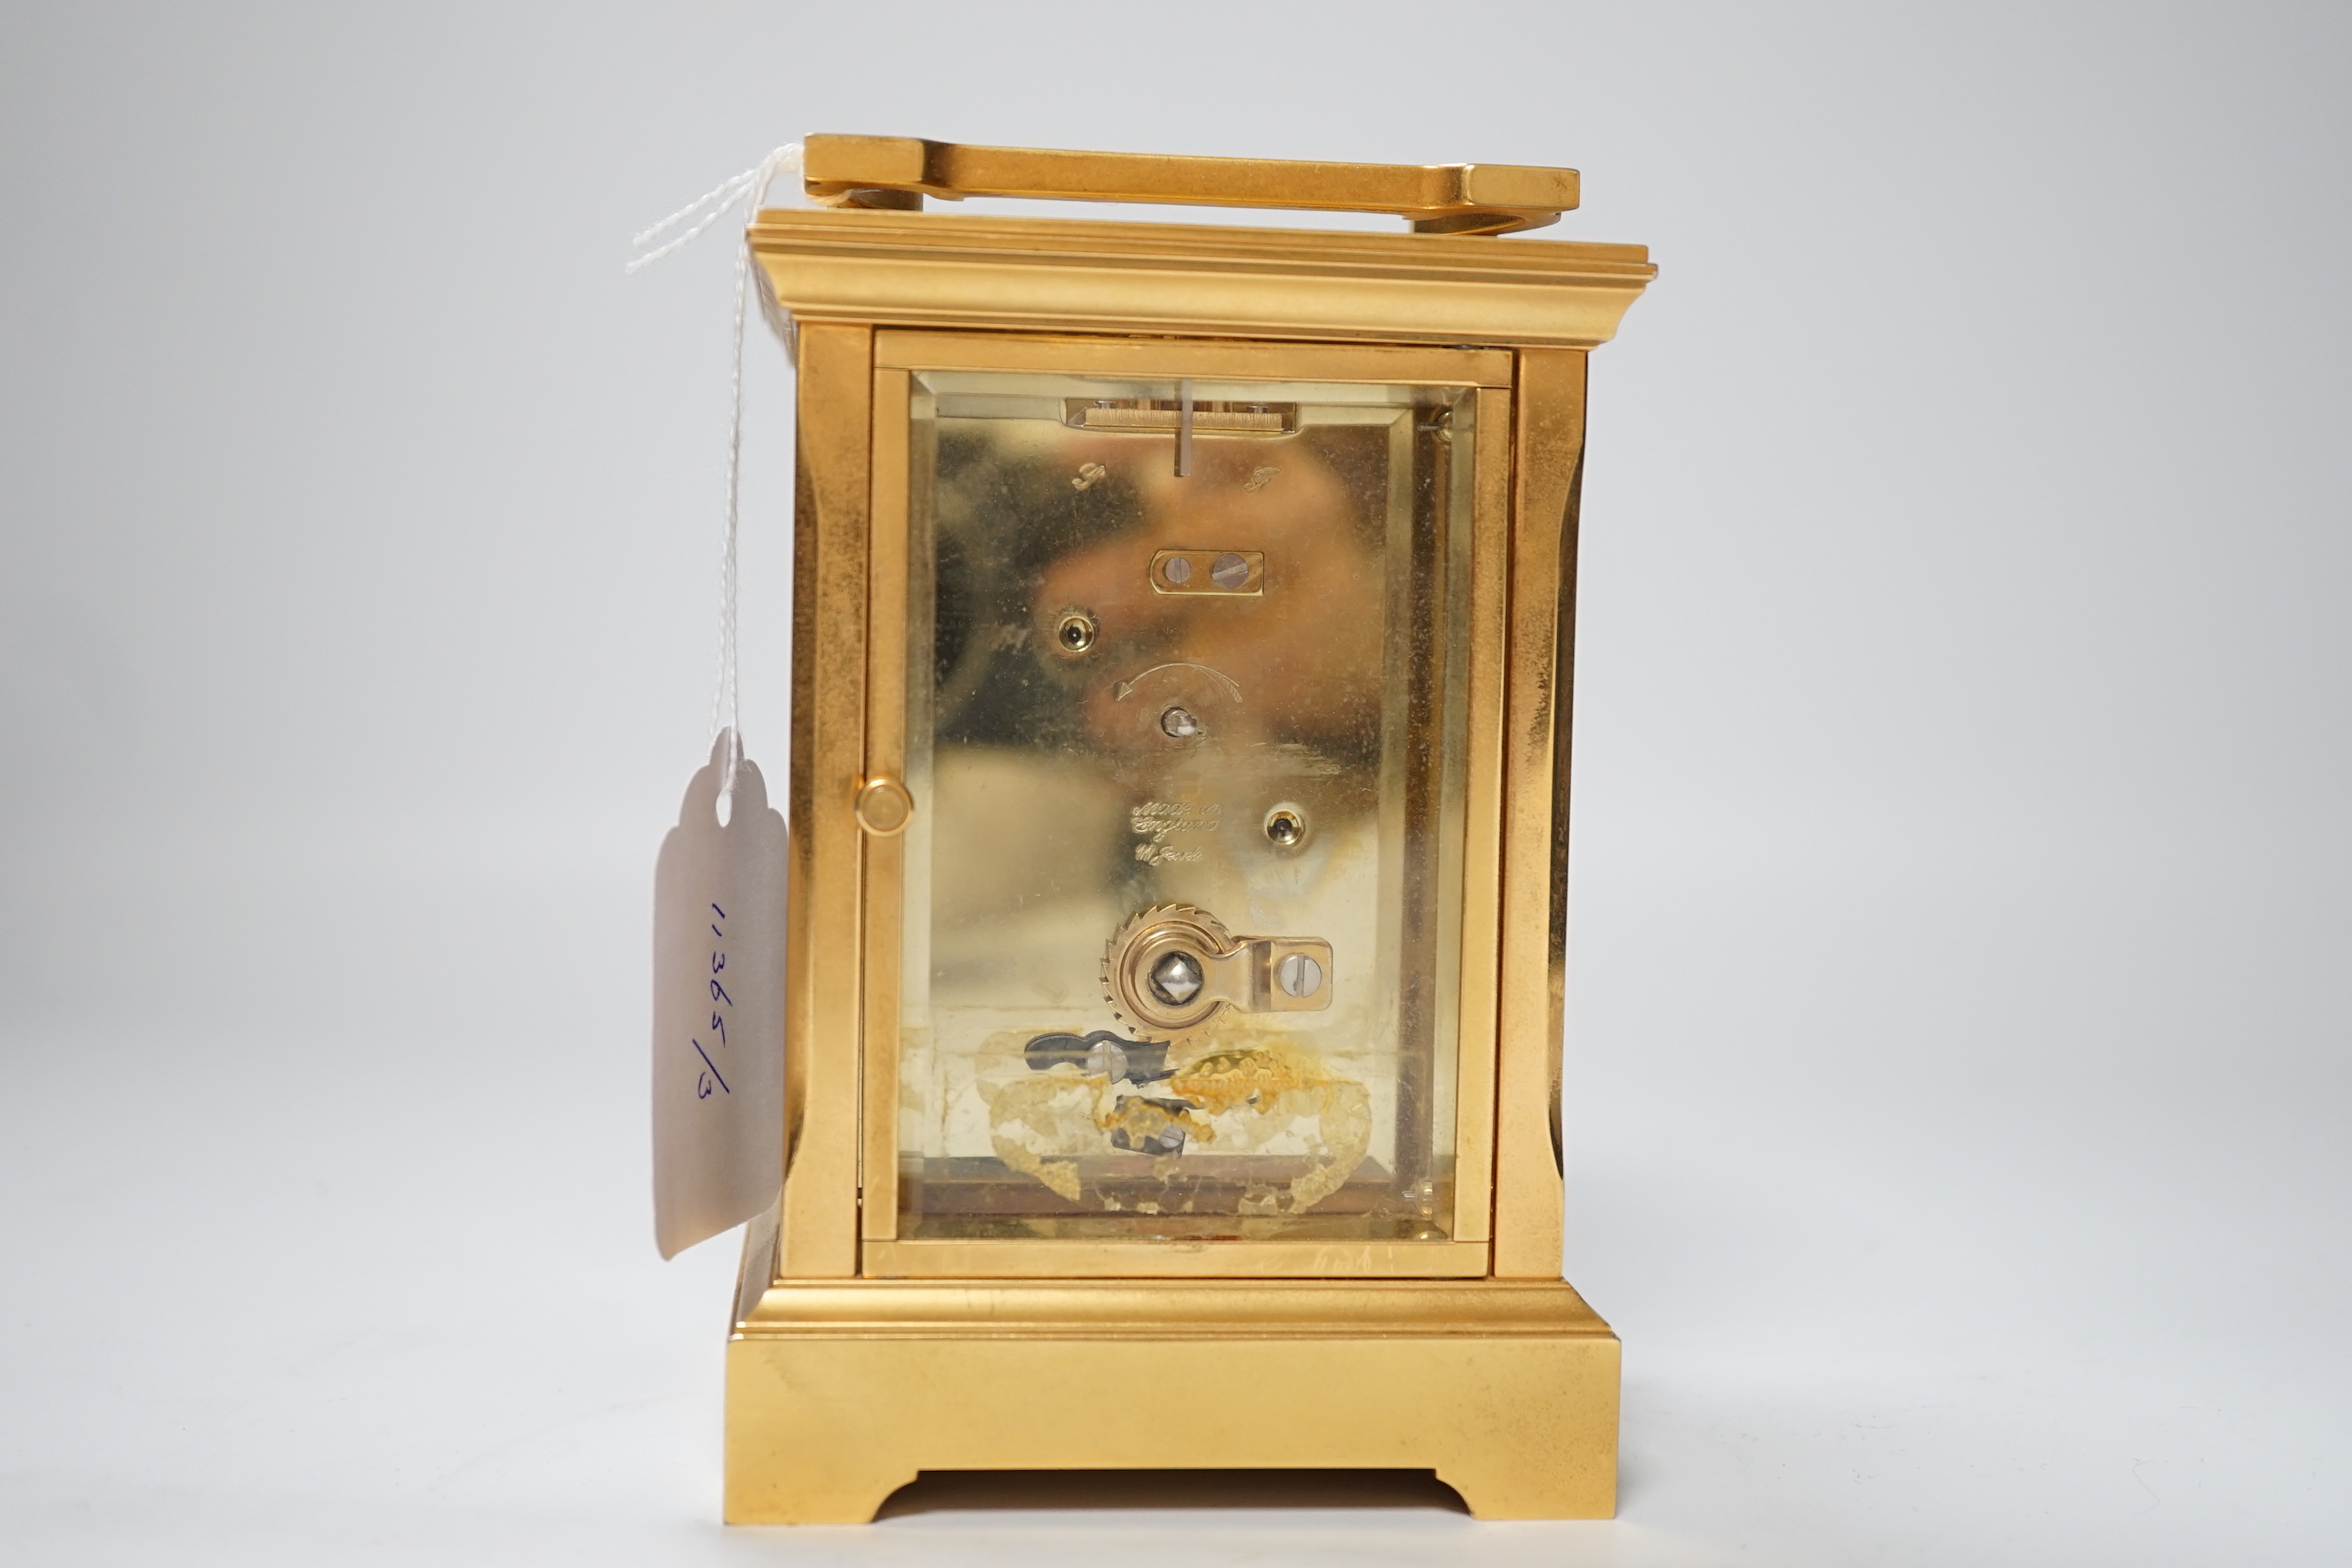 A carriage timepiece, signed Garrard and Co. to the face and stamped ‘Made in England’, 13.5cm